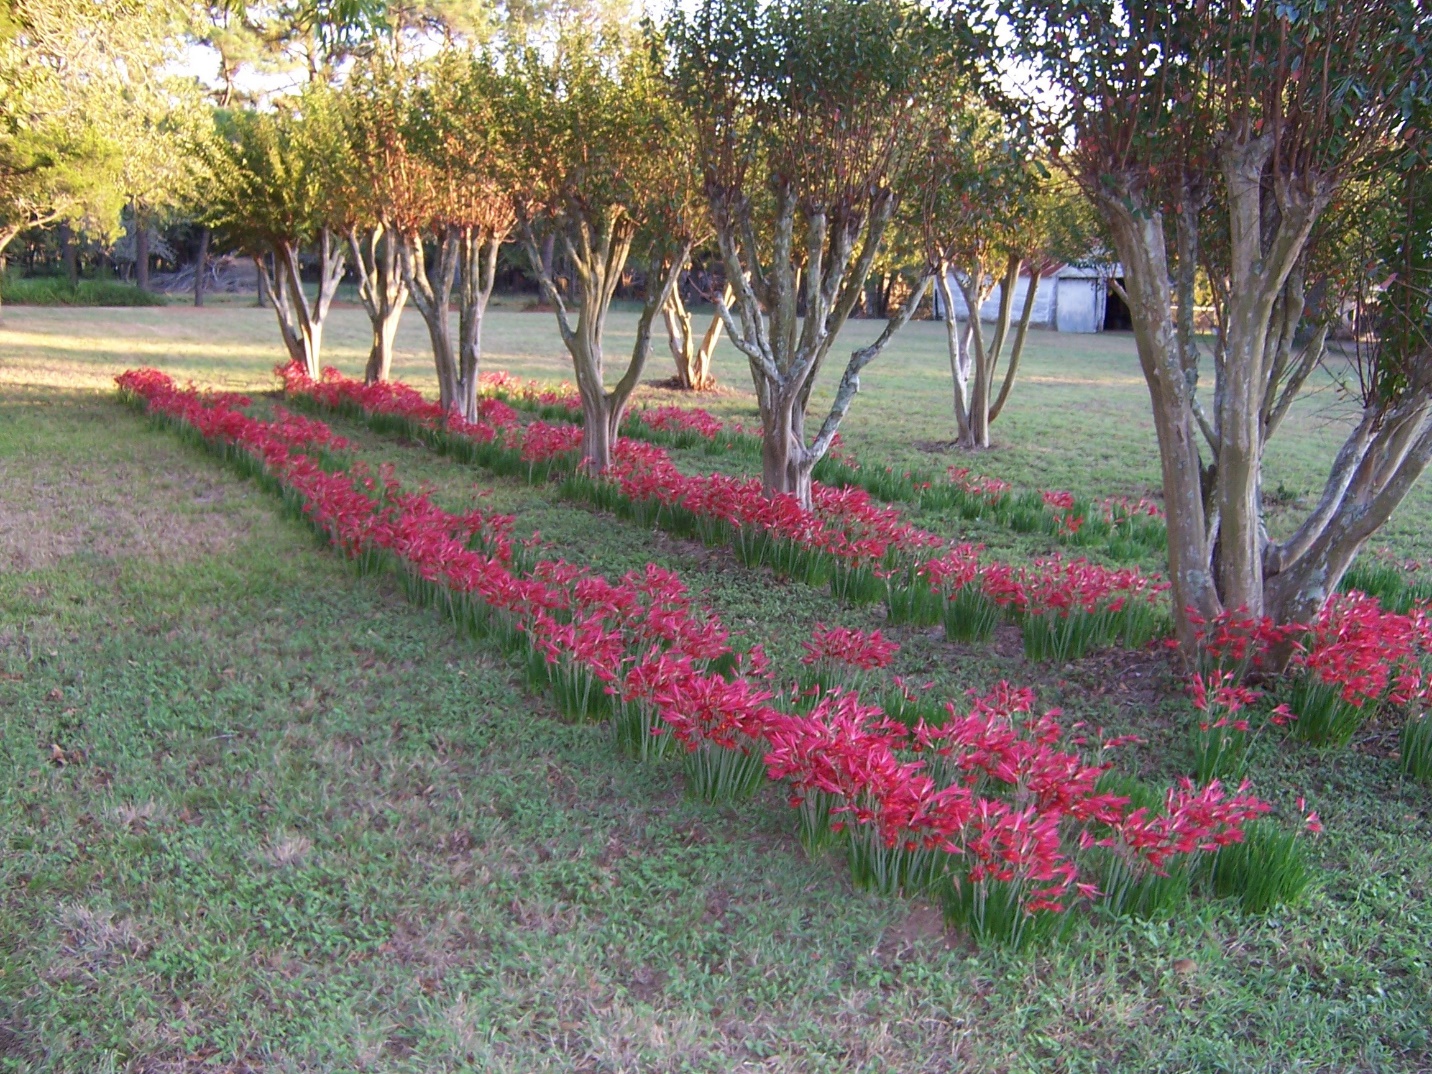 A picture containing schoolhouse lilies (Rhodophiala bifida) also known as oxblood lilies growing with crapemyrtles in Central Texas. Description automatically generated